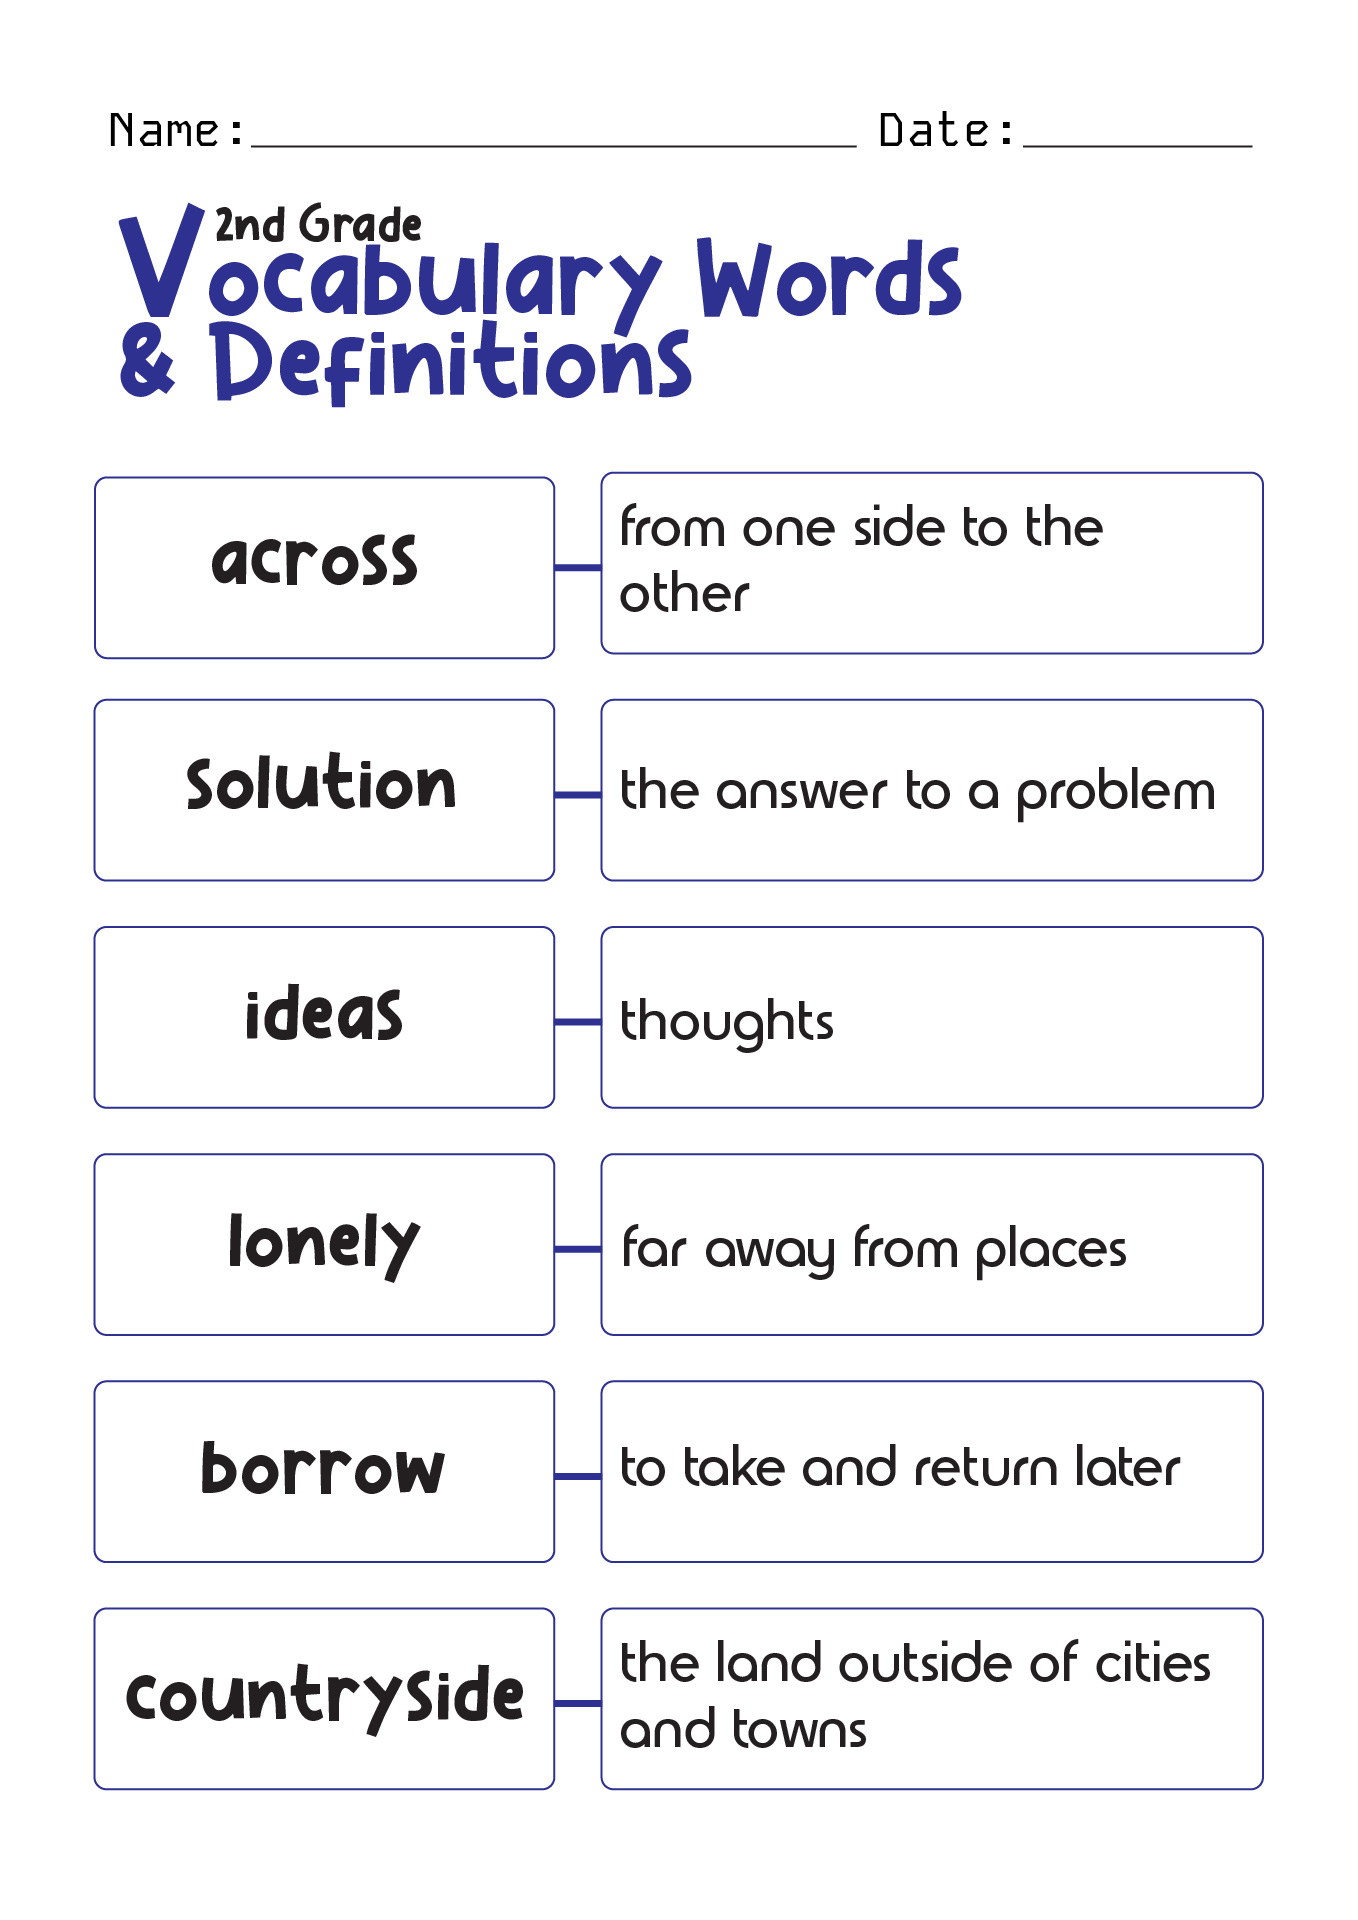 2nd Grade Vocabulary Words and Definitions